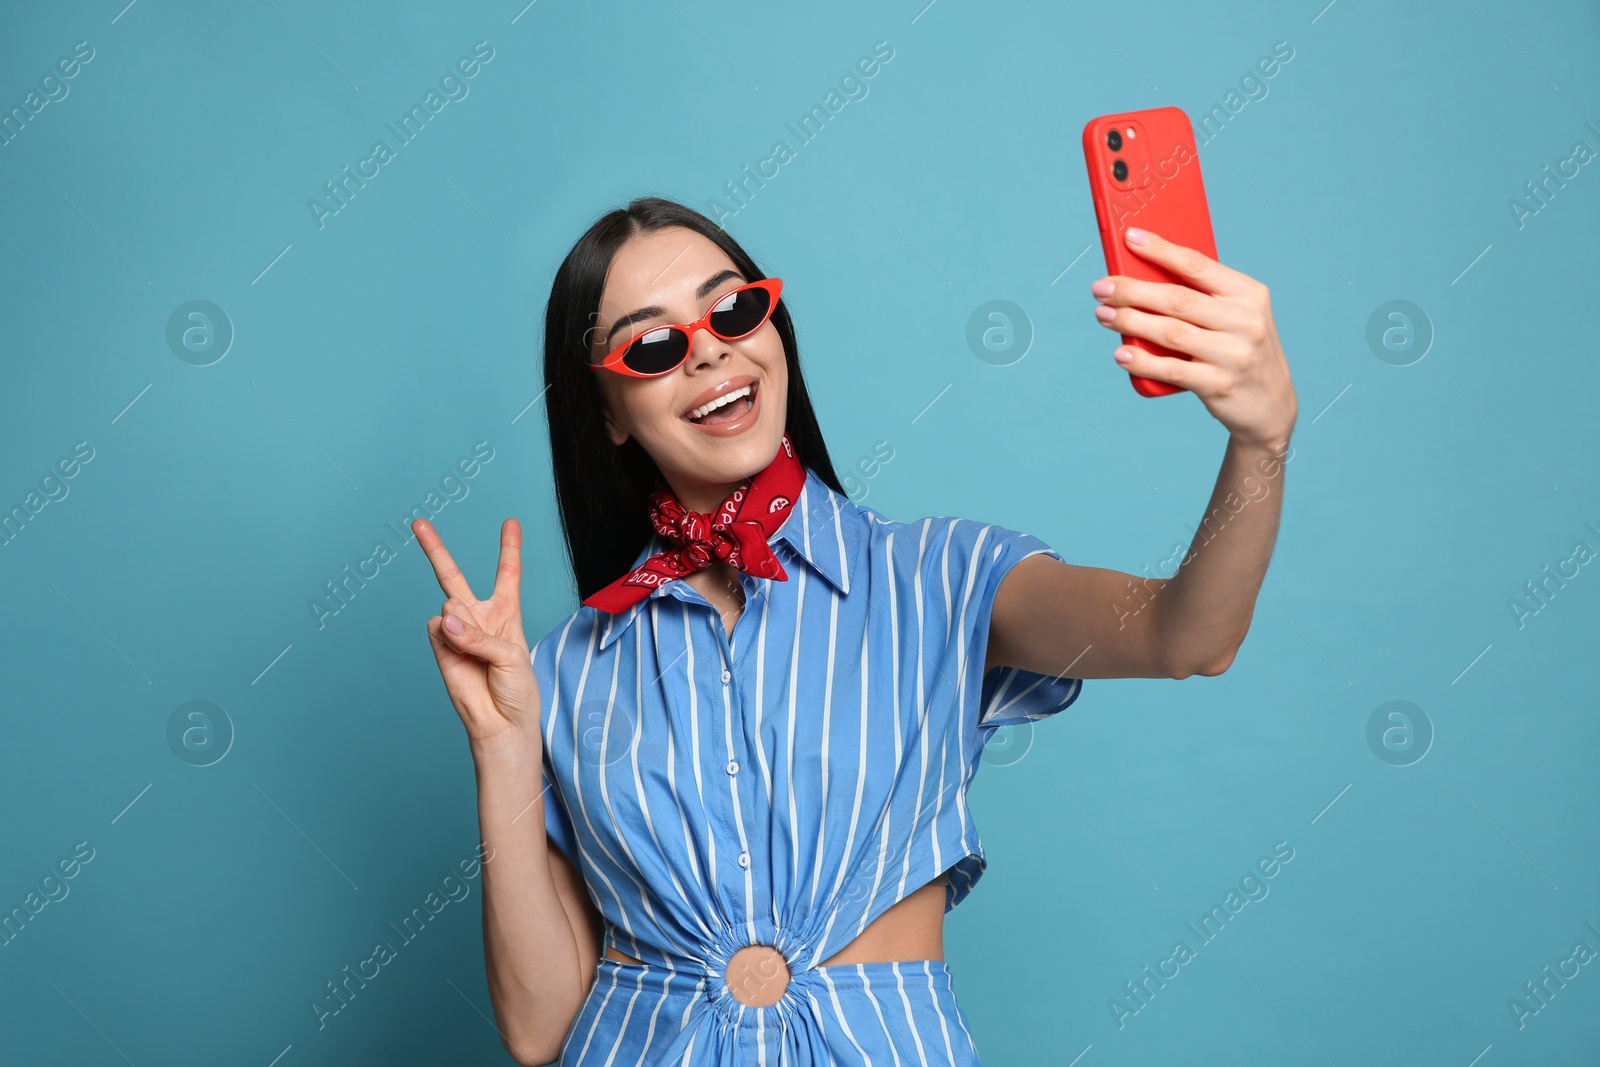 Photo of Fashionable young woman in stylish outfit with bandana taking selfie on light blue background